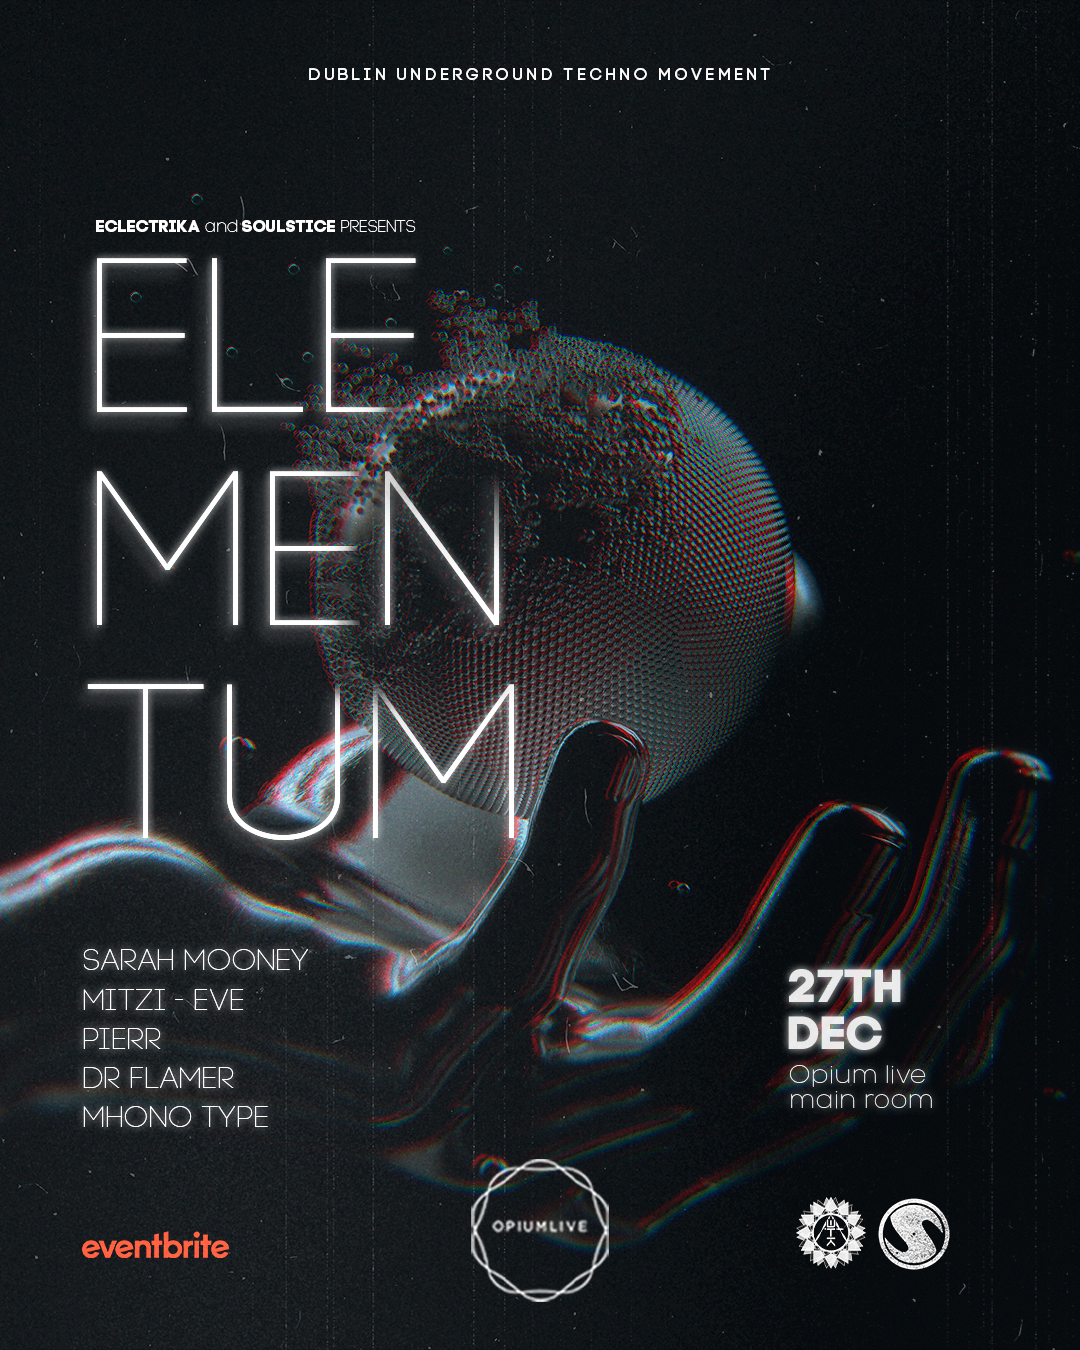 Eclectrika & Soulstice presents: ELEMENTUM Techno at Opium Live - フライヤー表